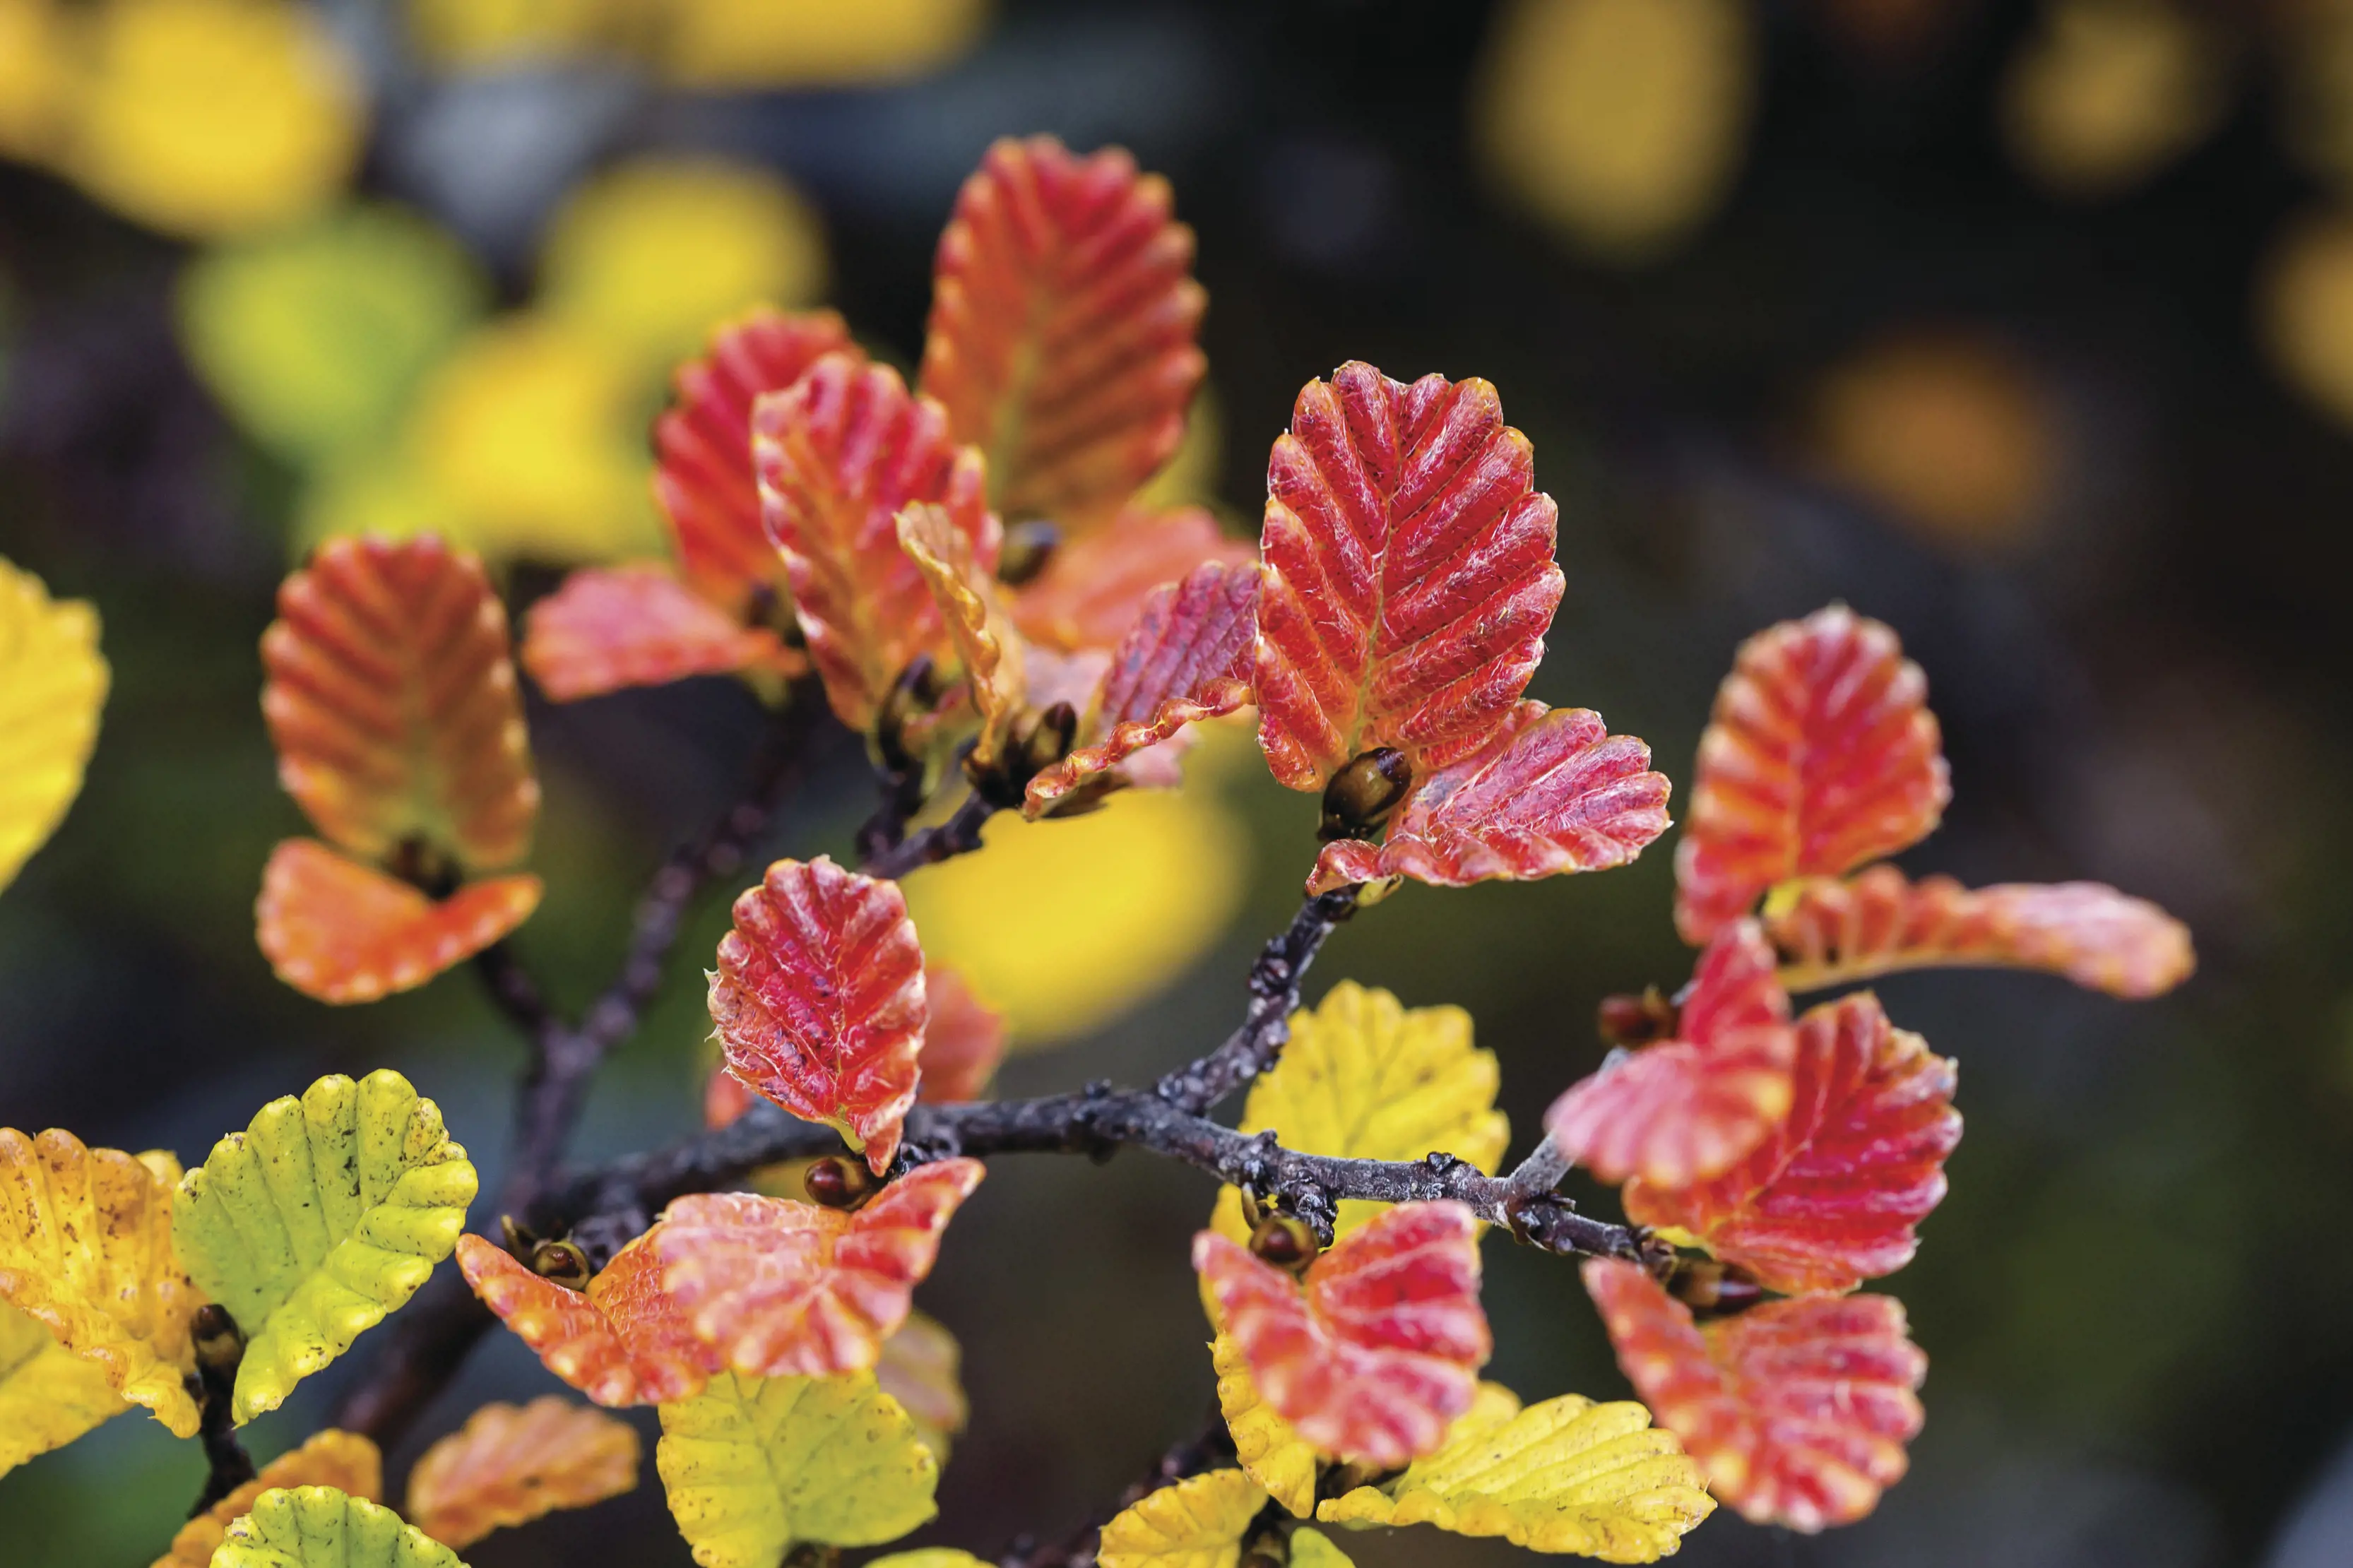 A Vibrant, macro image of Fagus. With stunning reds, greens, and yellows, this is s deciduous shrub endemic to the highlands of Tasmania.